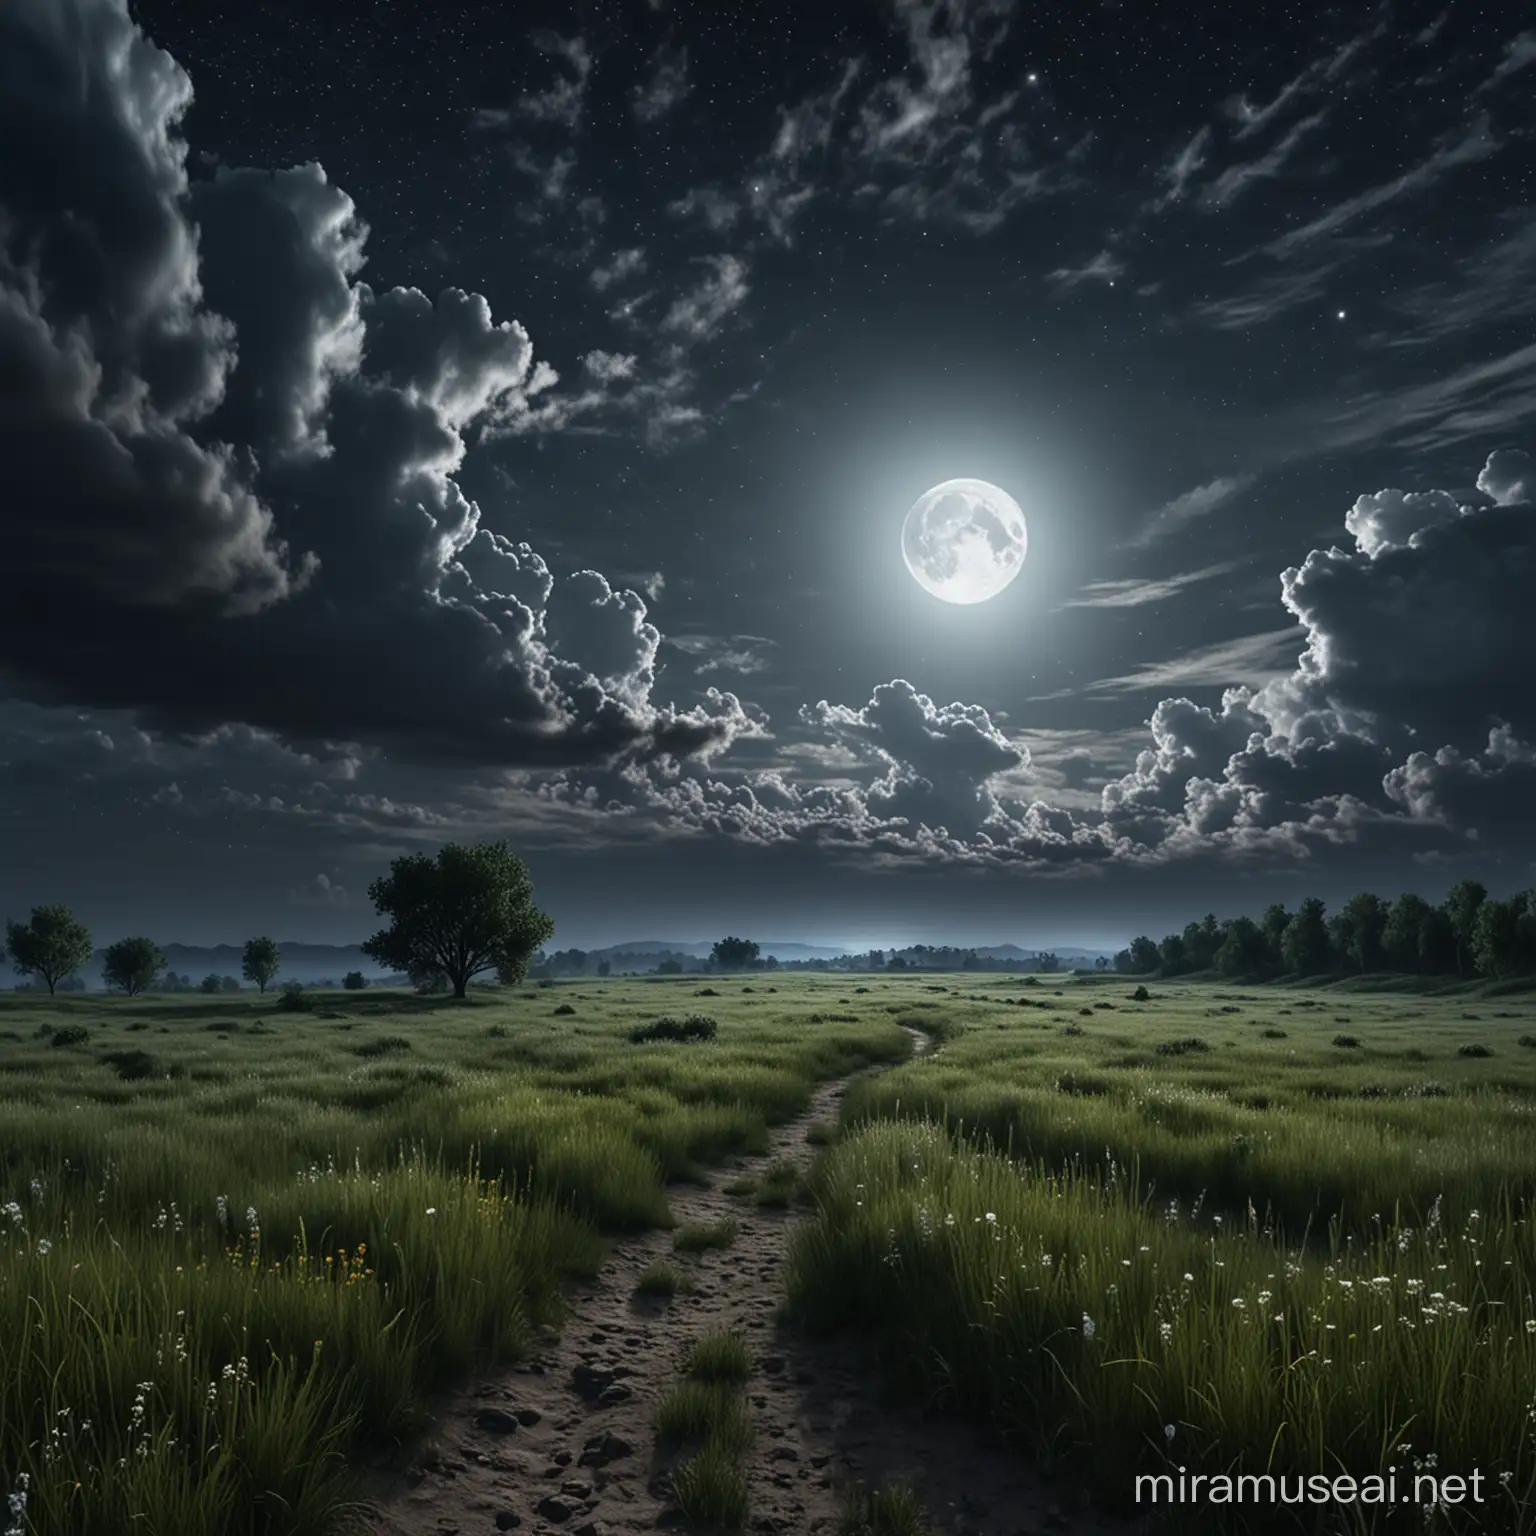 remote location, nighttime, meadow, clouds and moon in sky, realistic, HD.